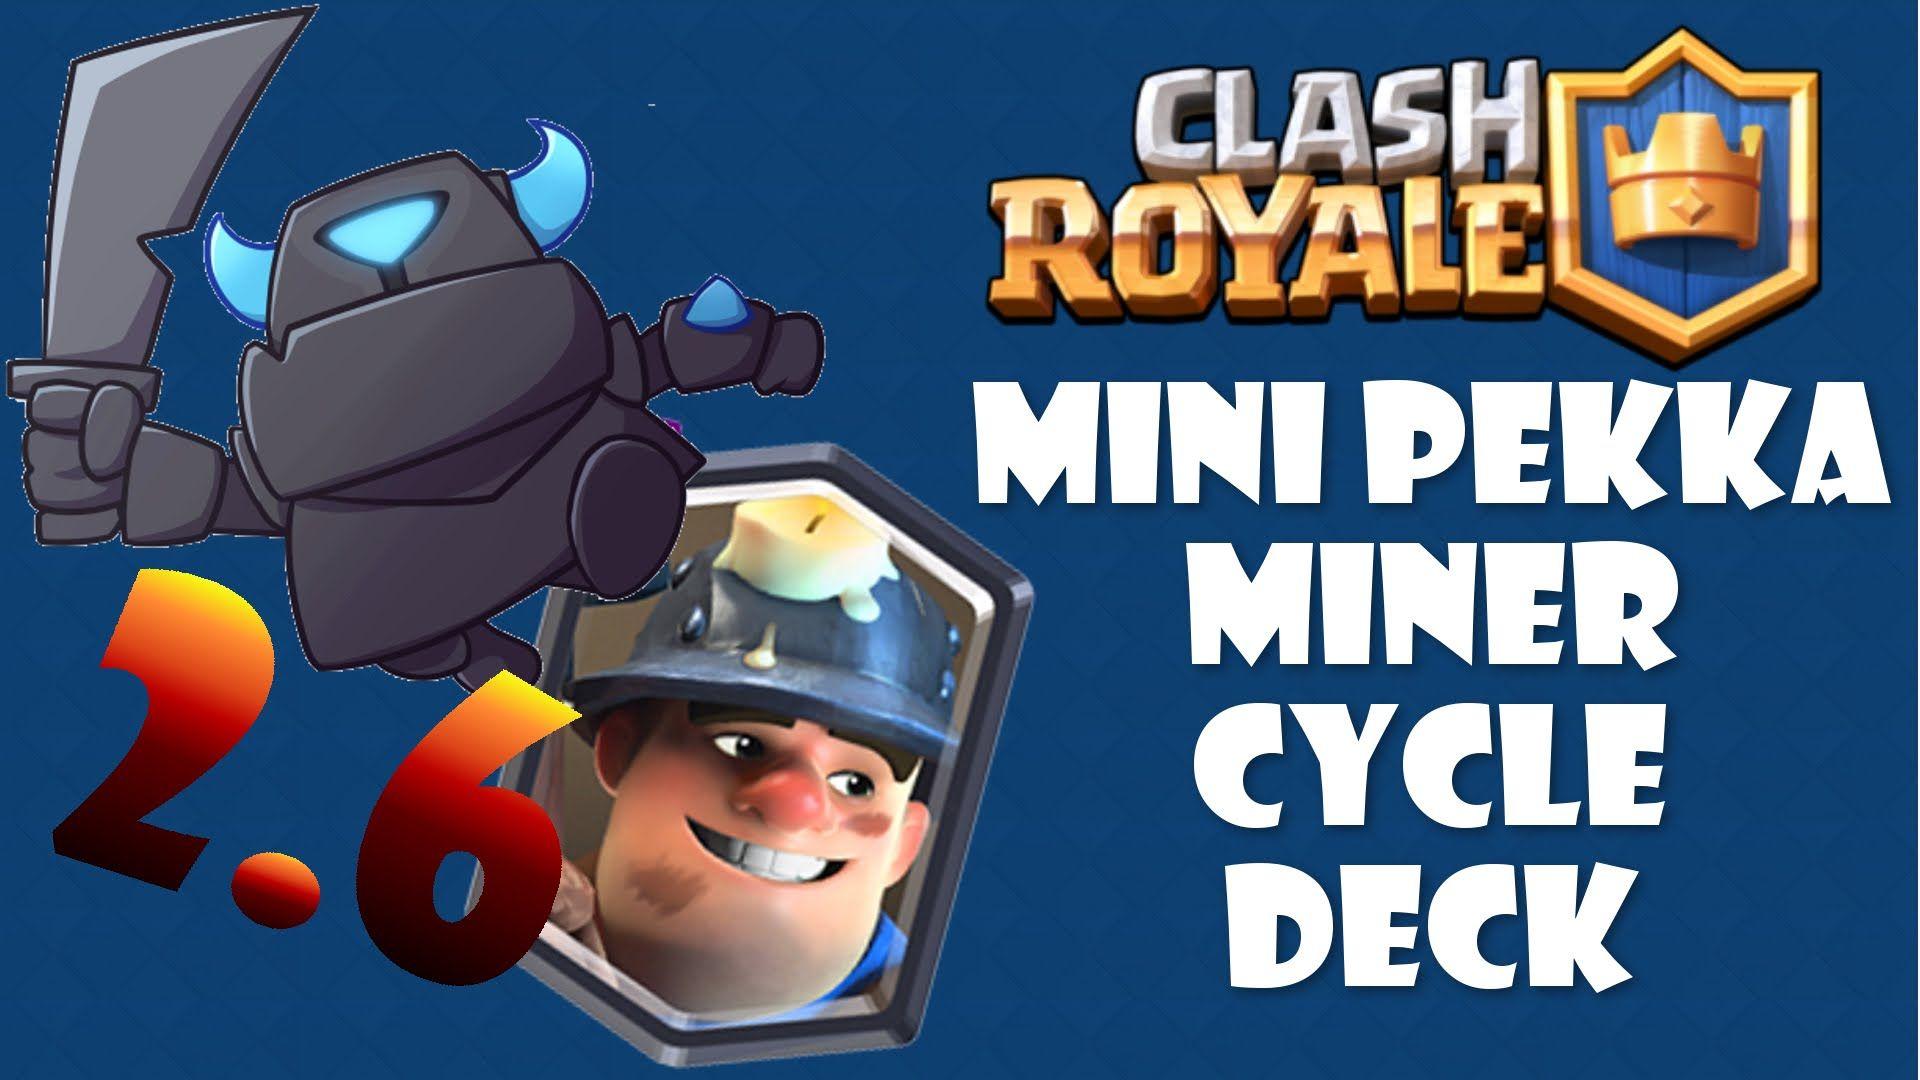 CLash Royale Best Miner Mini Pekka Cheap Deck For Arena 6 8